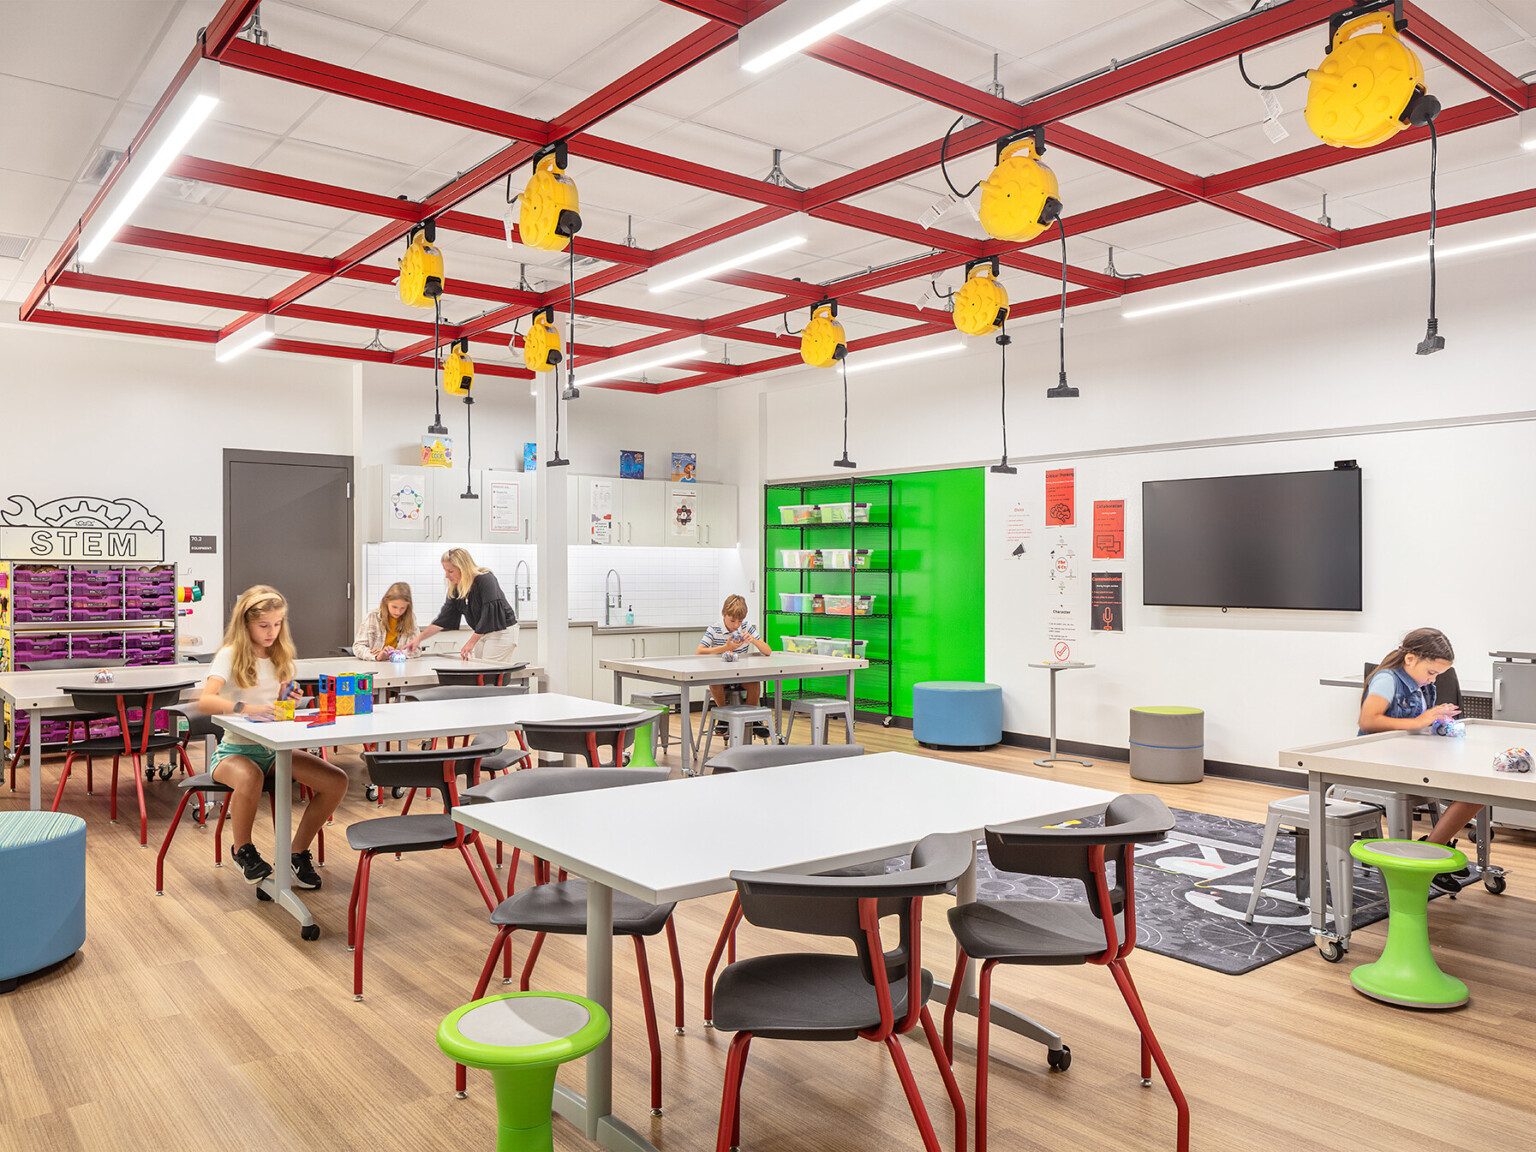 Elementary School with flexible learning spaces and seating, power cords hang overhead, STEM activities